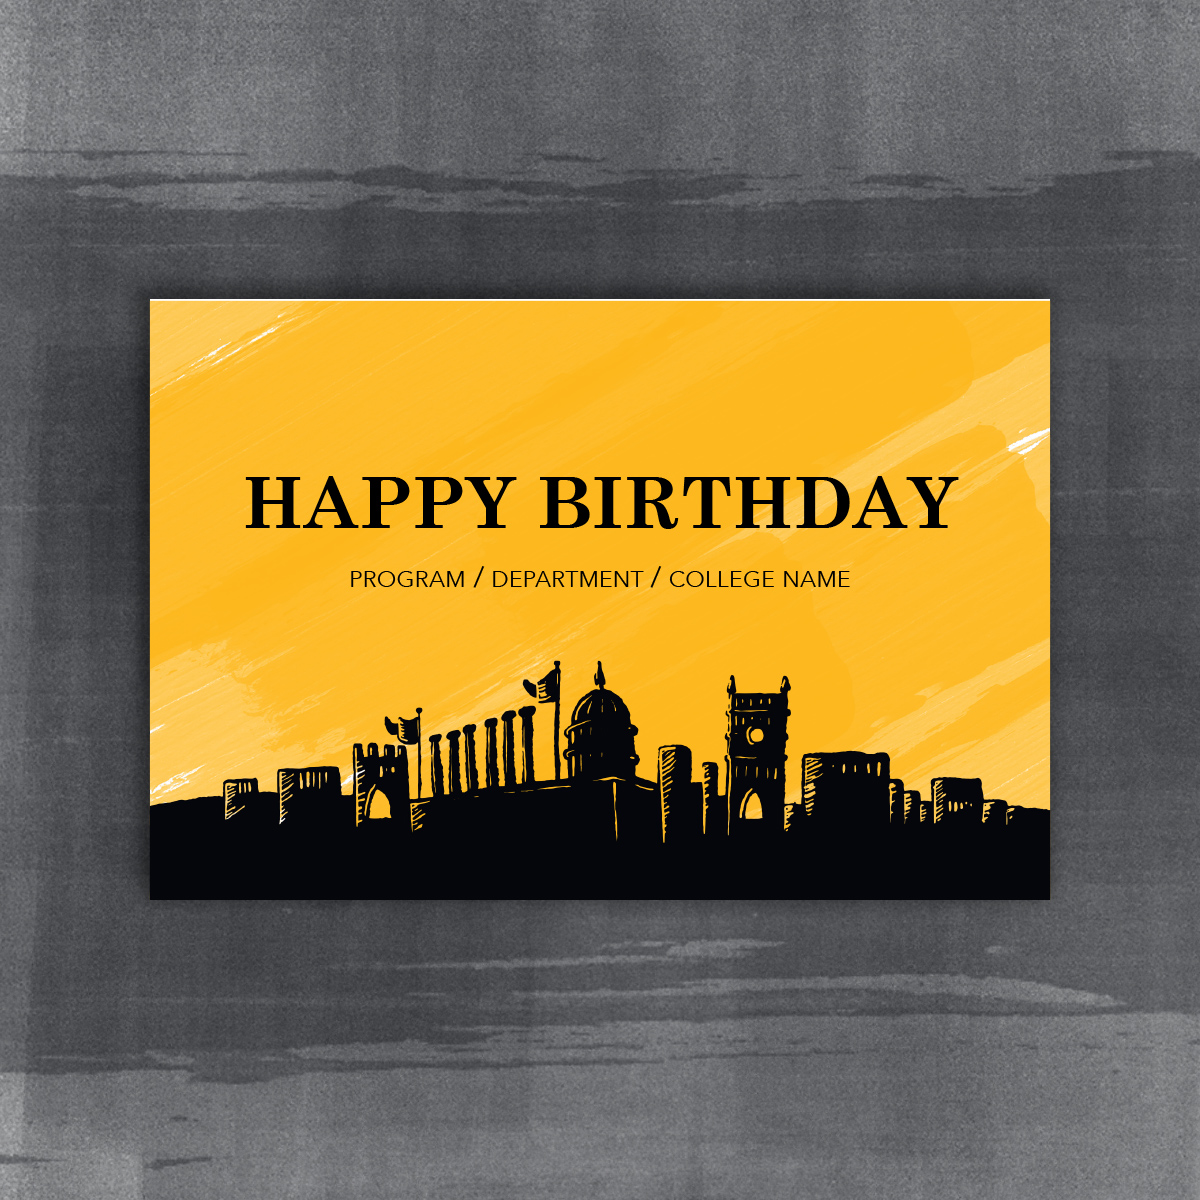 Card with a Happy Birthday message. Gold background with a sketched silhouette of Mizzous campus